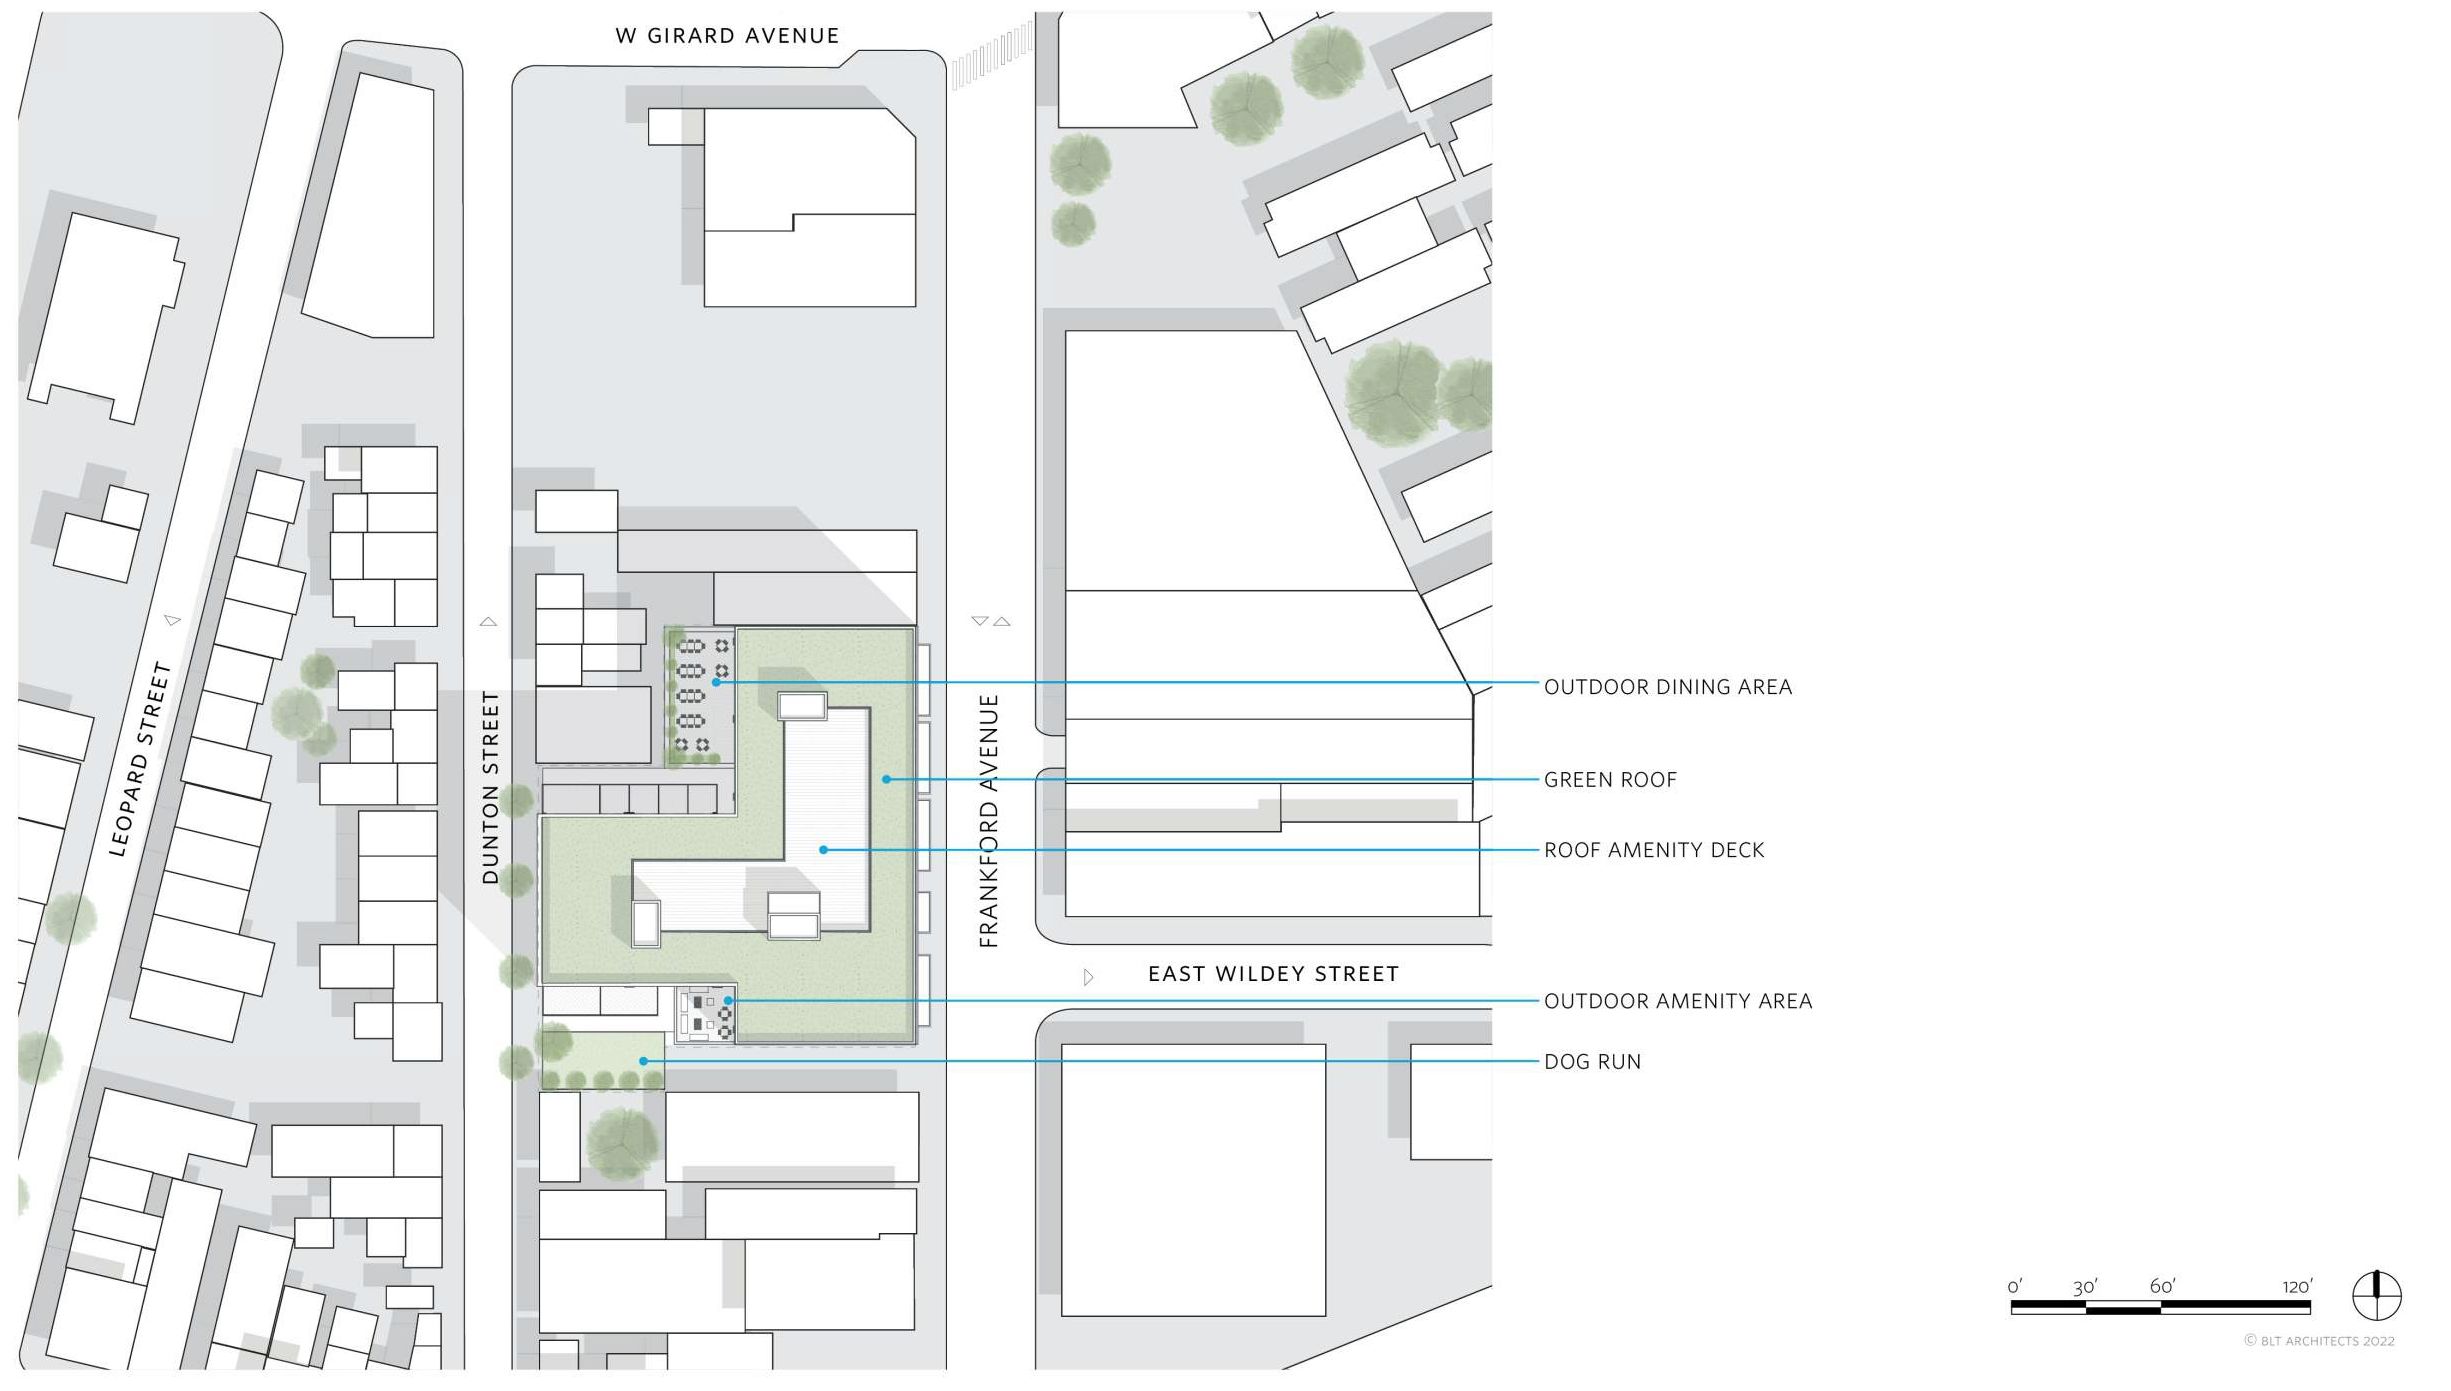 1120 Frankford Avenue. Proposed site plan. Credit: BLT Architects via the Civic Design Review